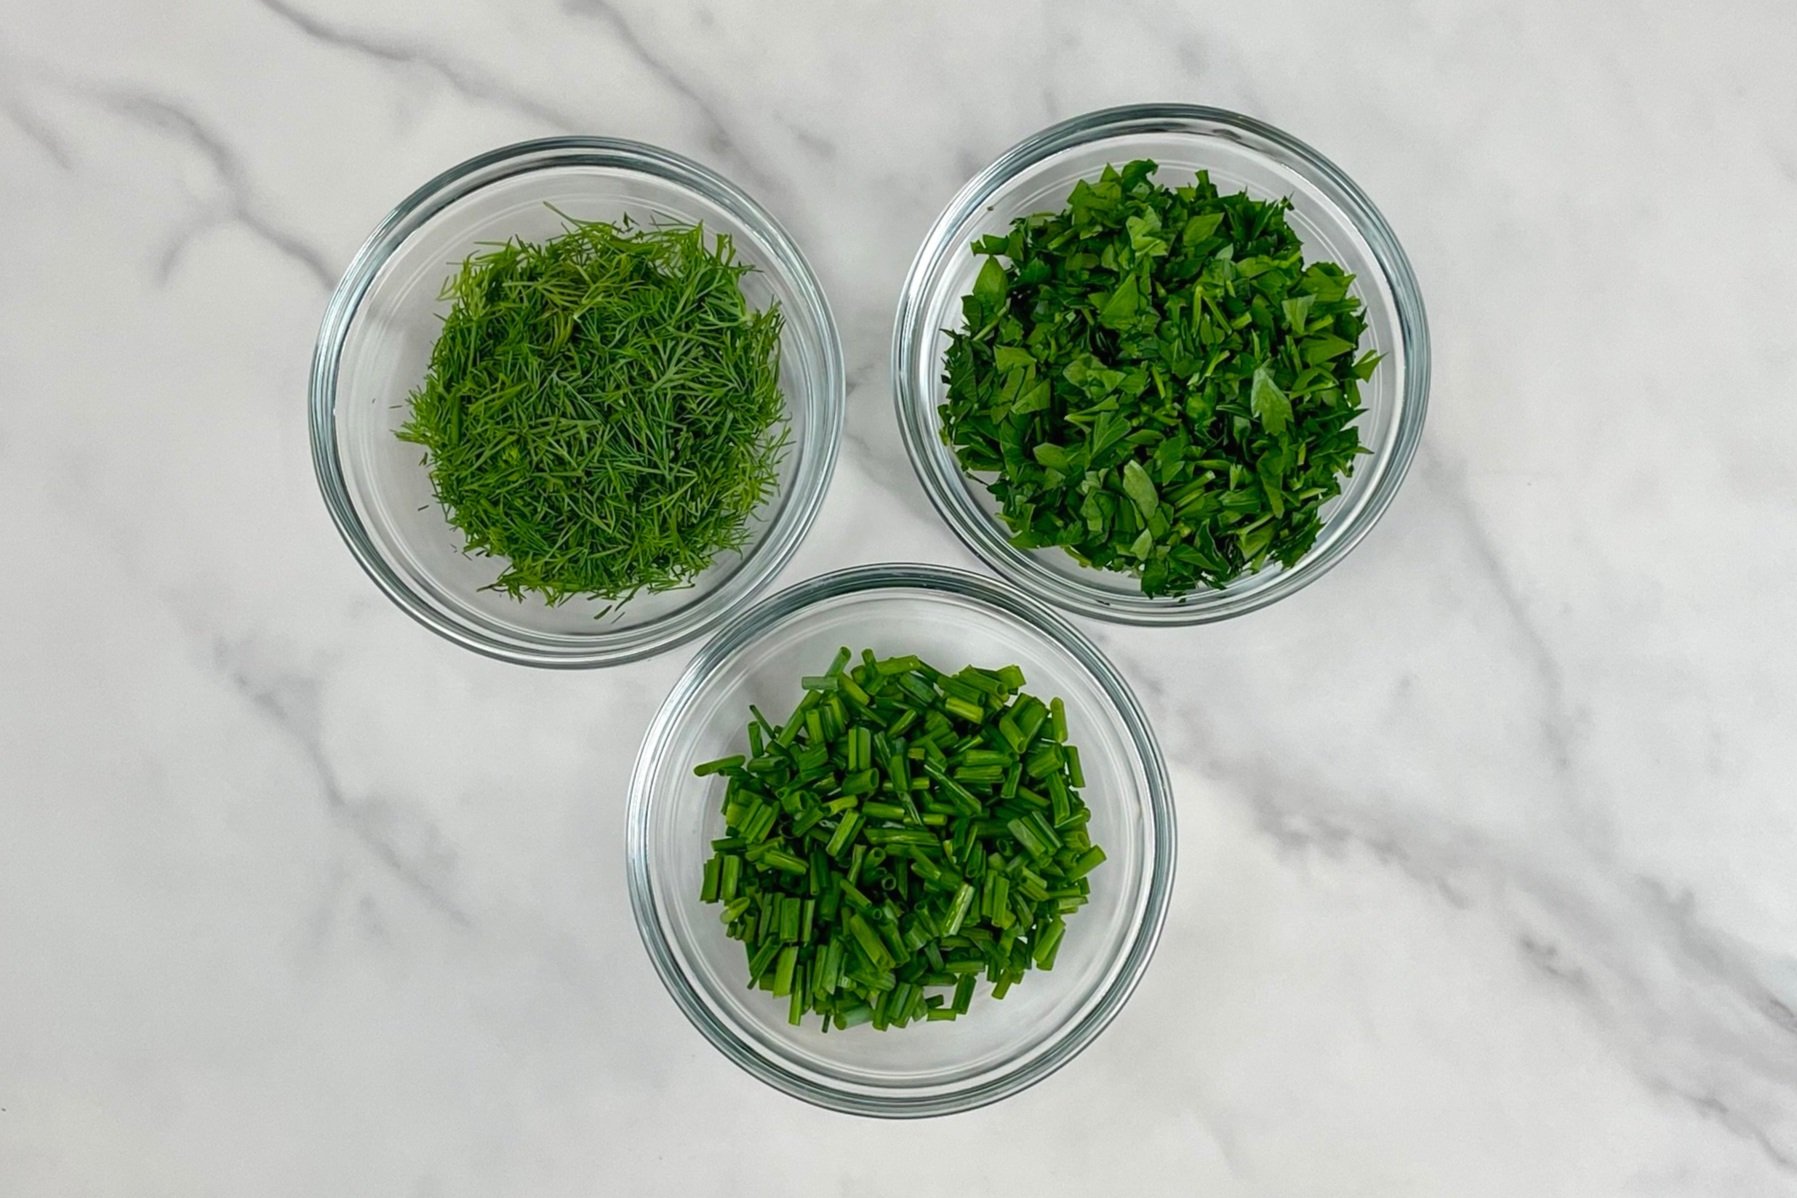 Chopped dill, chives &amp; parsley.